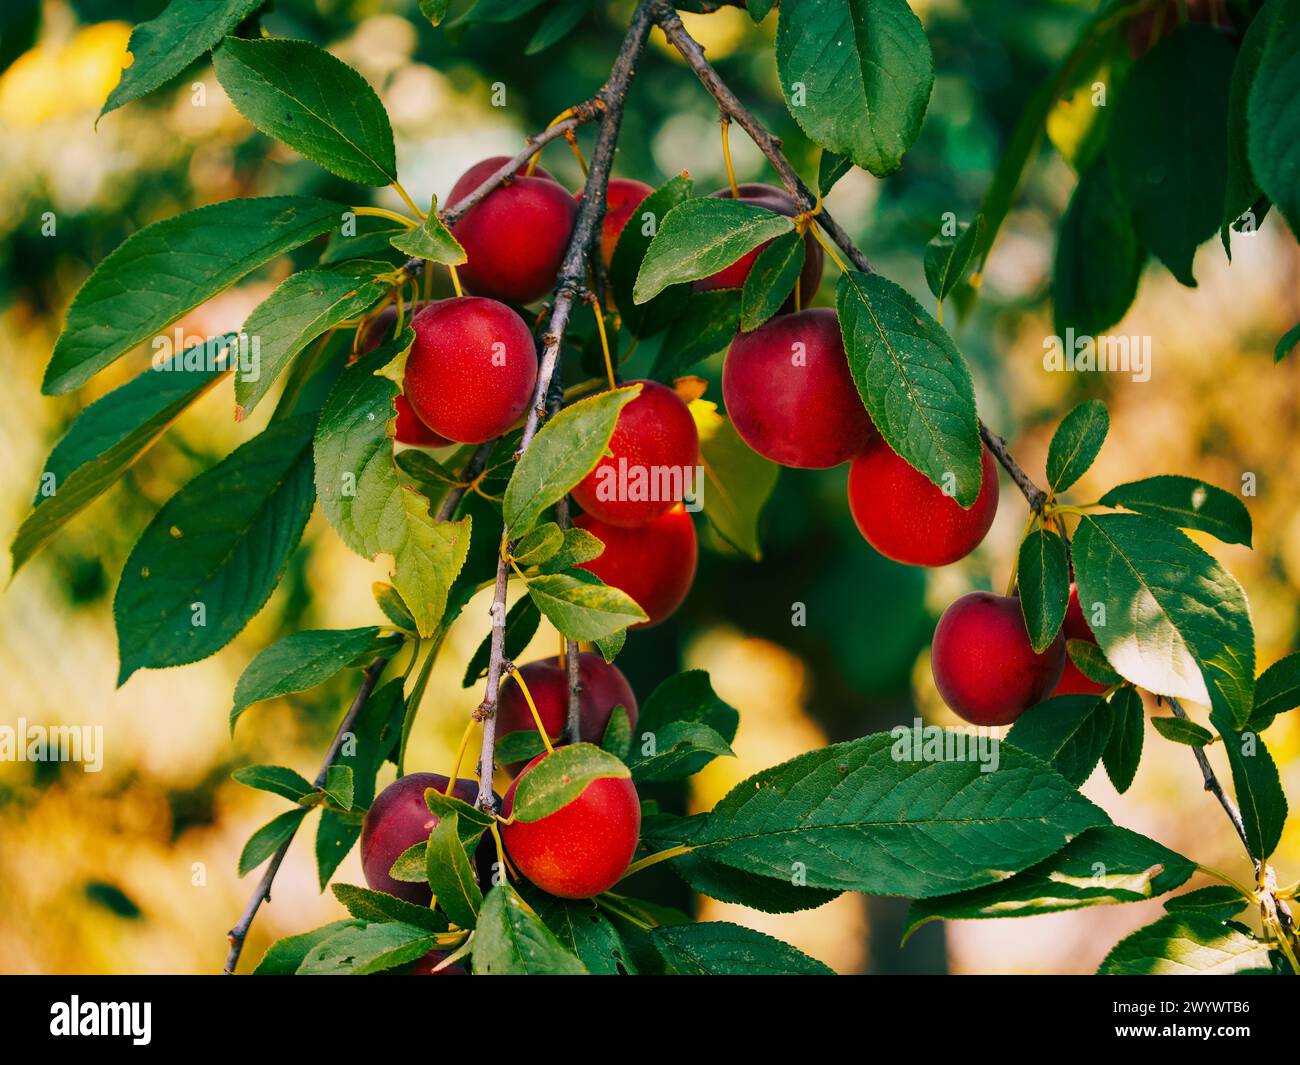 The image captures the ripening process of cherry plums on a tree. Useful for educational content about fruit farming. Stock Photo